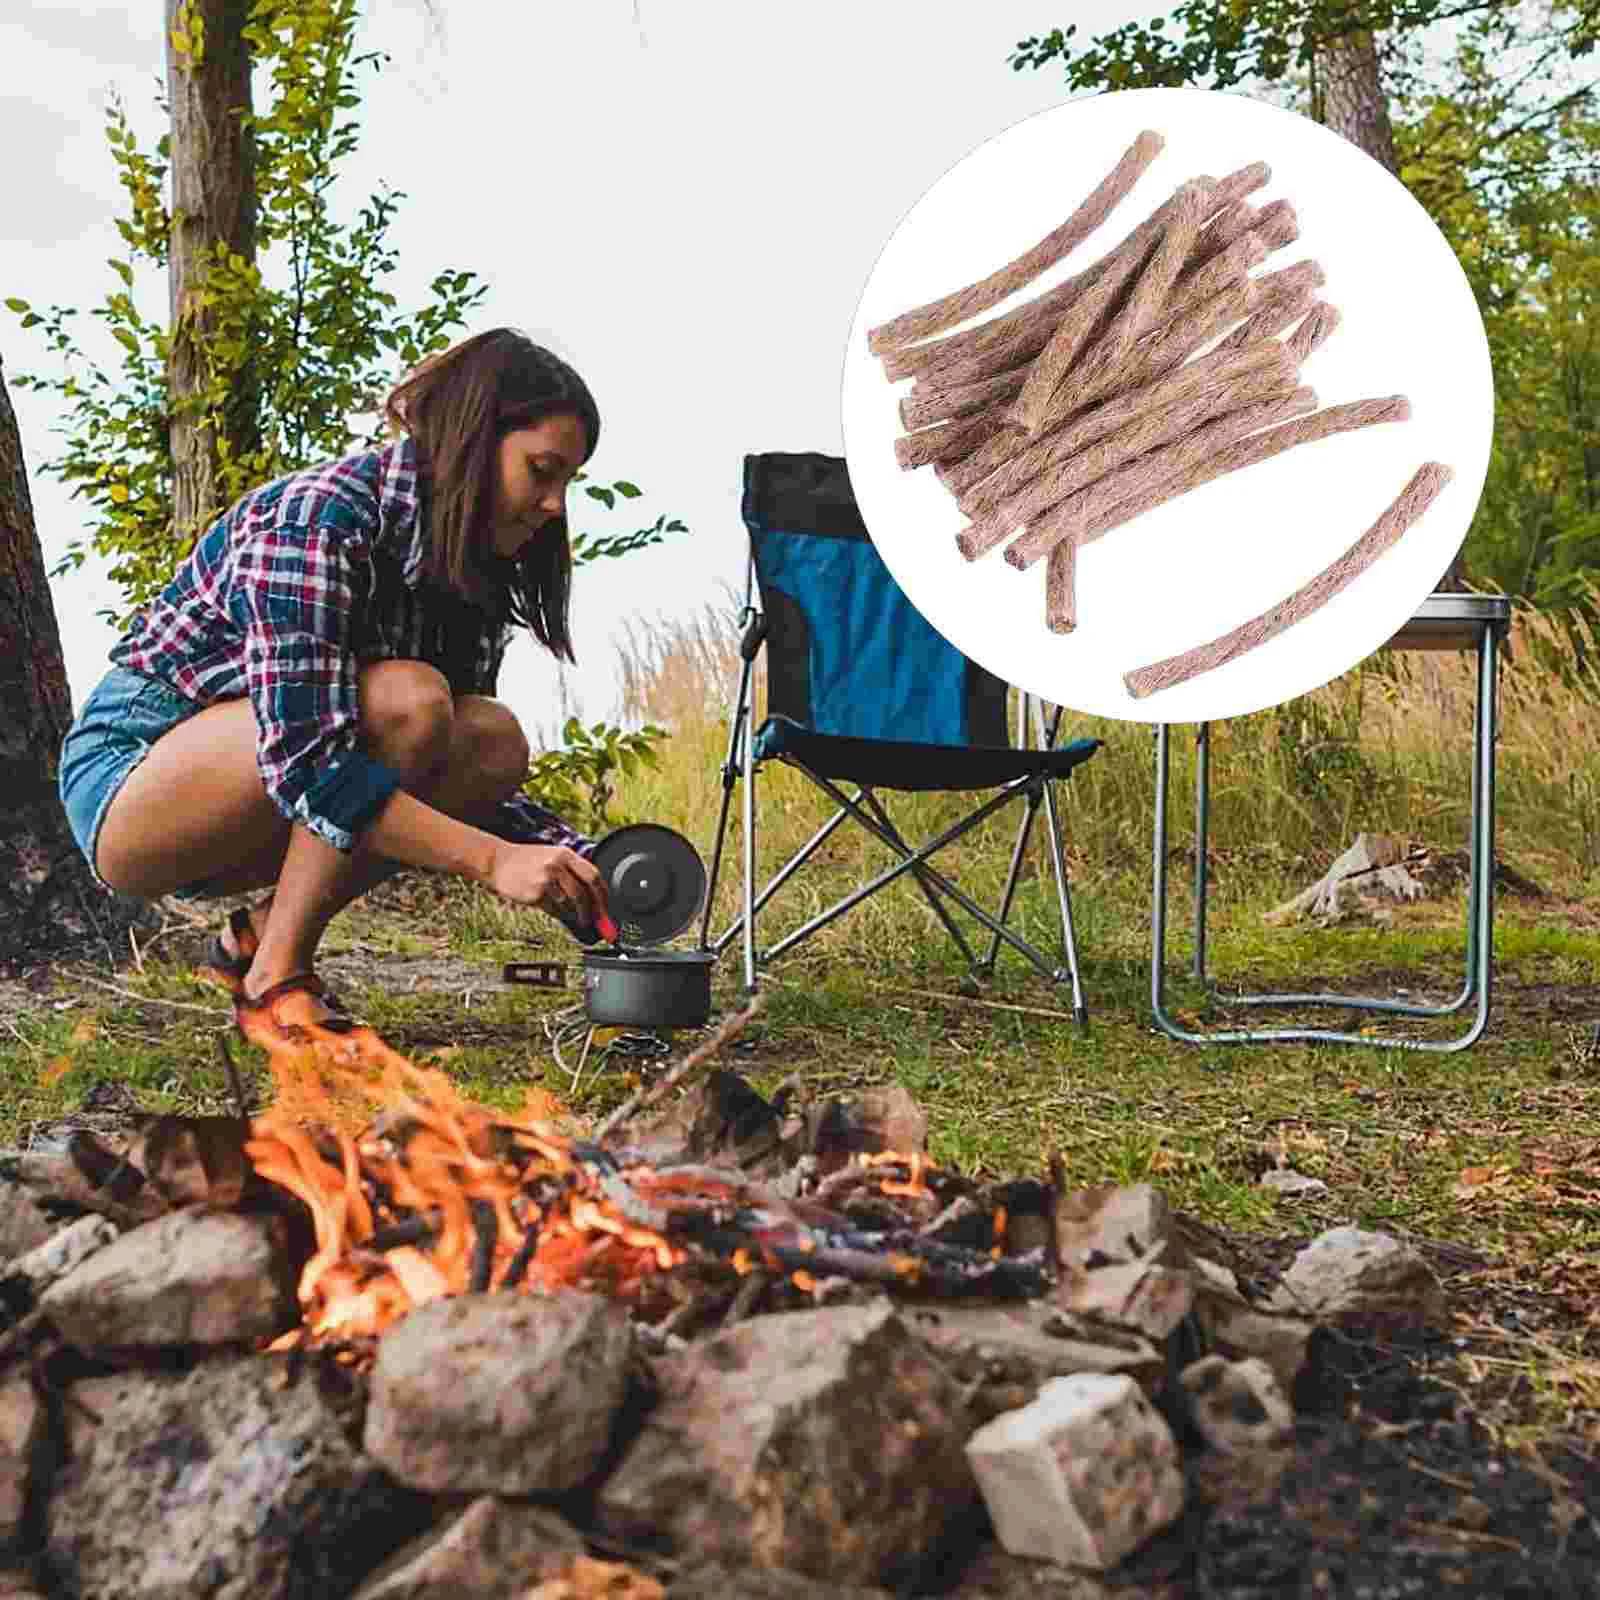 

20 Pcs Backpack Camping Kindling Rope Tinder Wick Cord Starter 7.5X0.2X0.2CM Hiking Fire Starters Coffee Travel